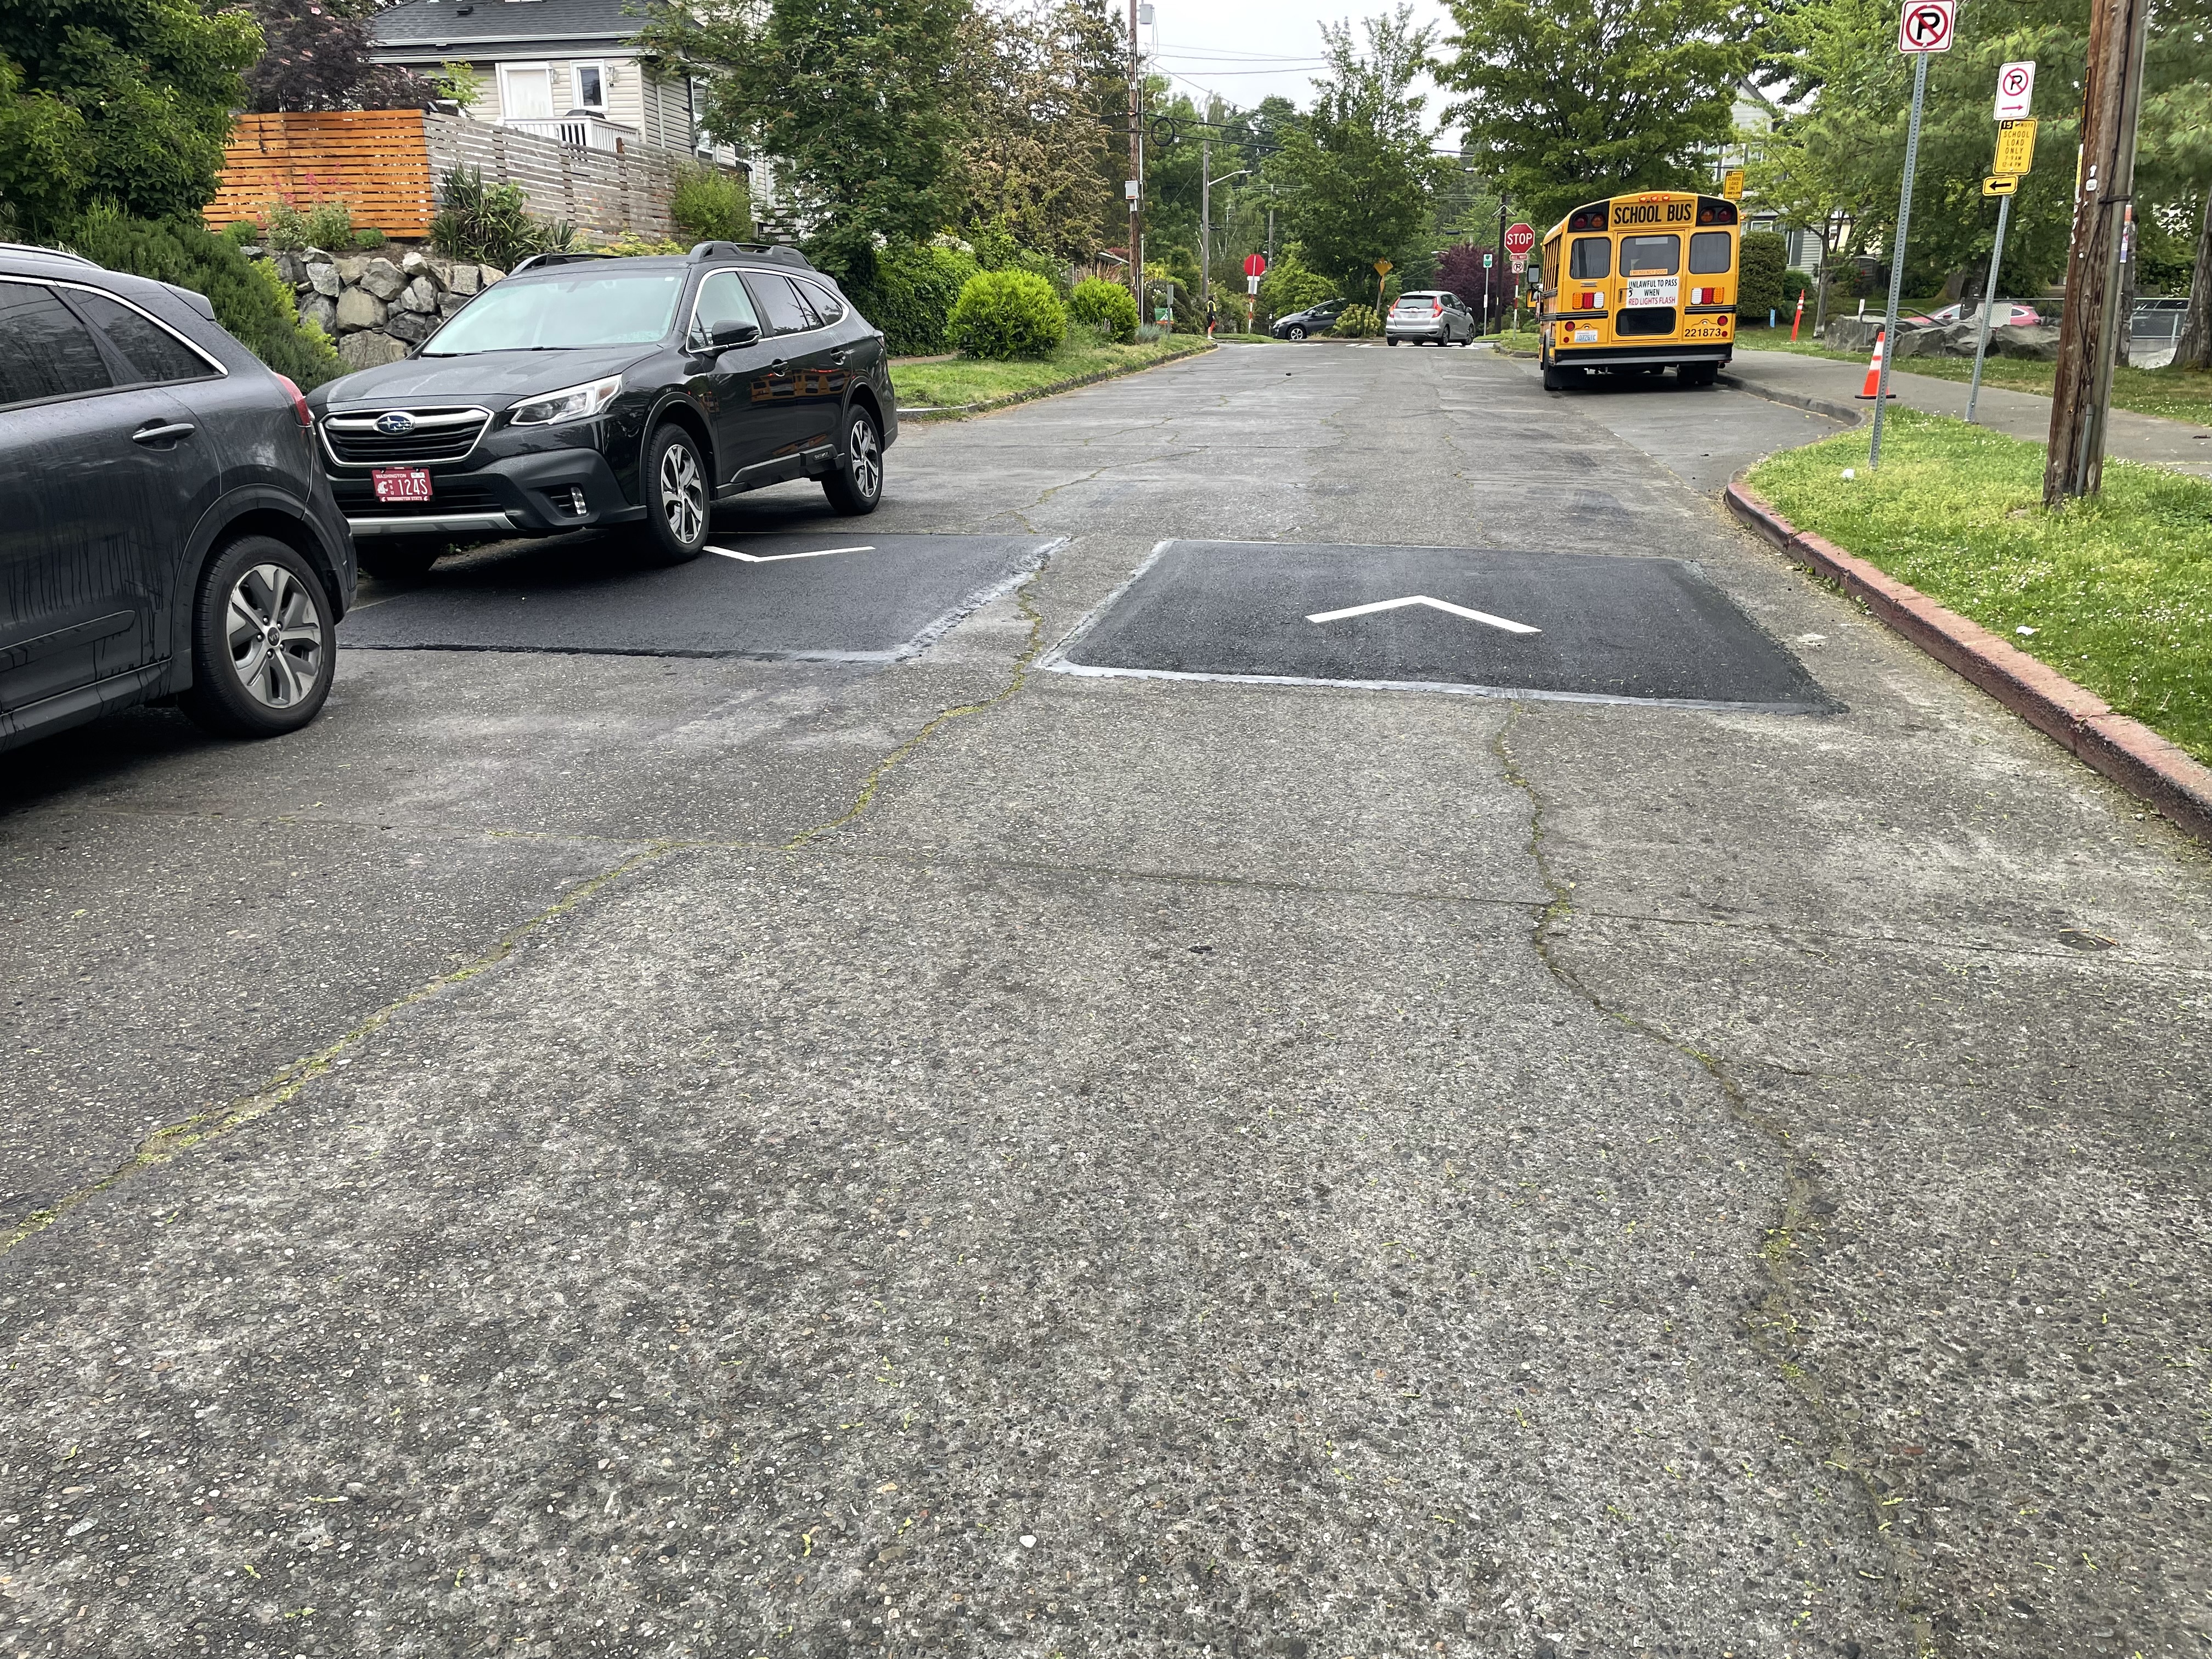 Newly installed speed humps by John Muir Elementary School